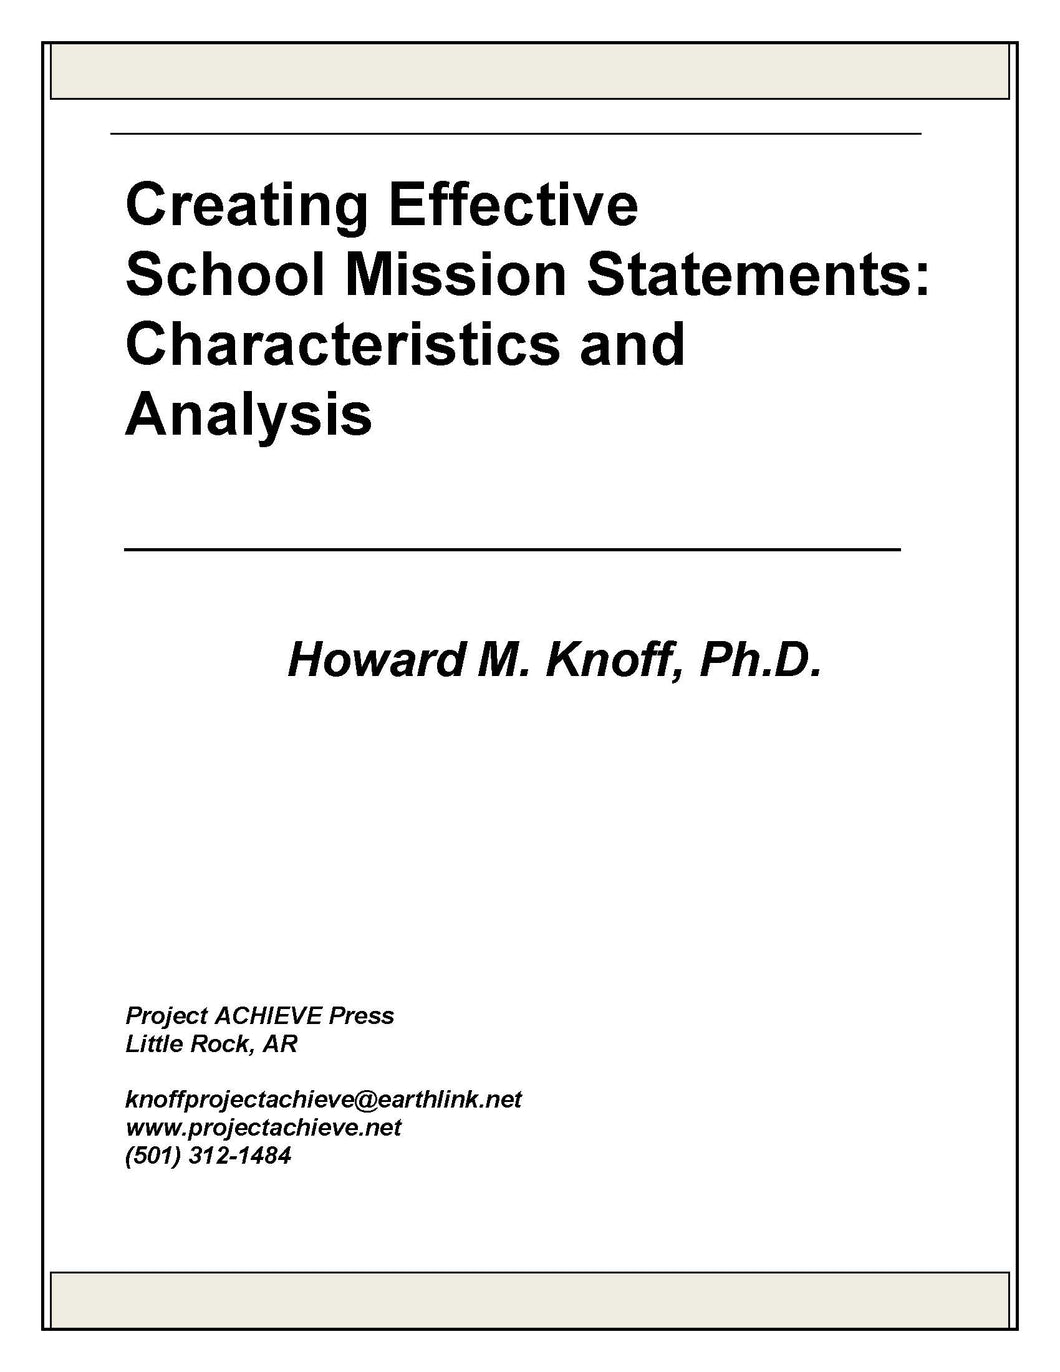 Creating Effective School Mission Statements: Characteristics and Analysis